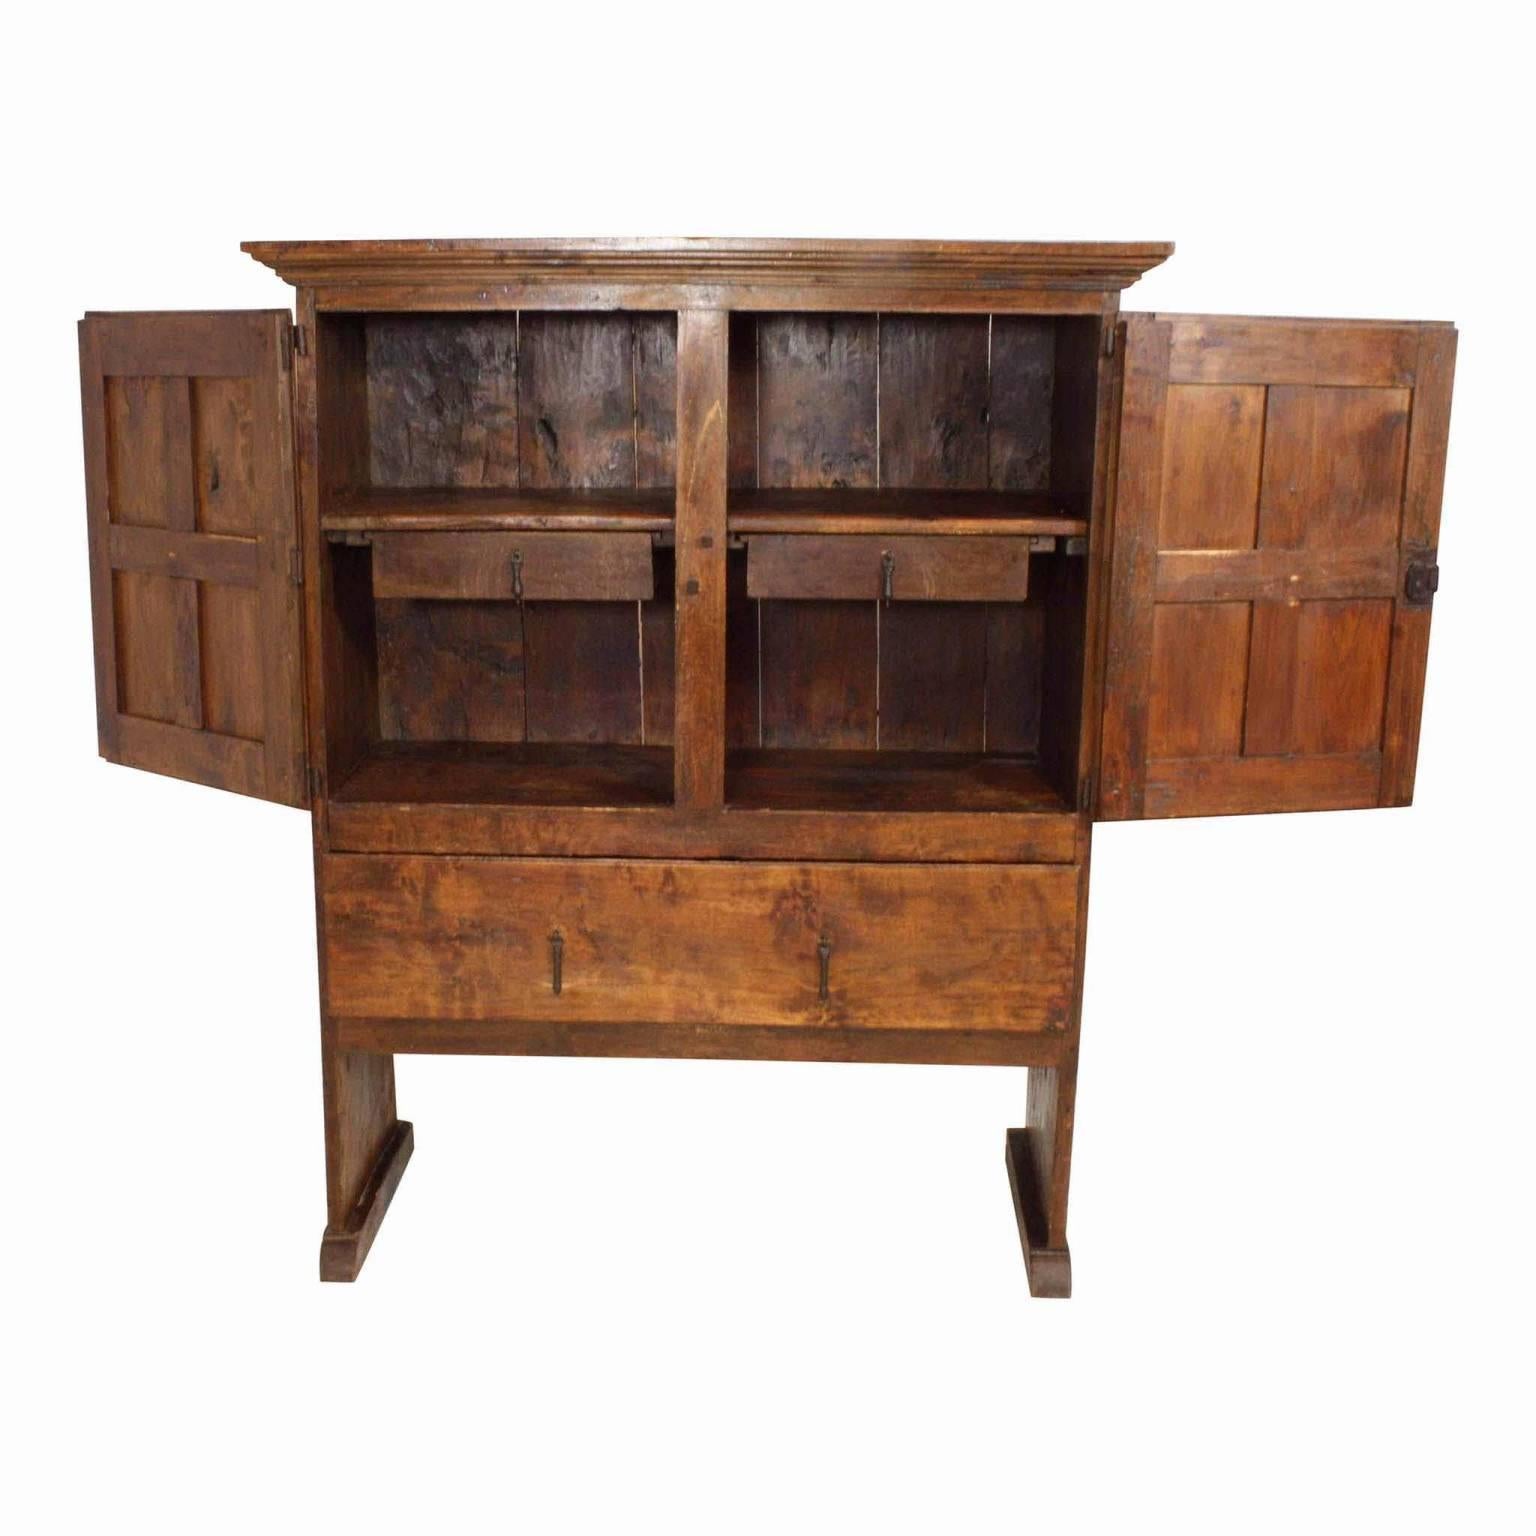 Beautifully rustic patina and a wonderful interior two centuries in the making. Two Seamless, hand hewn, one inch thick planks act as the sides and legs of the cabinet. A large bottom drawer and two smaller interior drawers with original matching